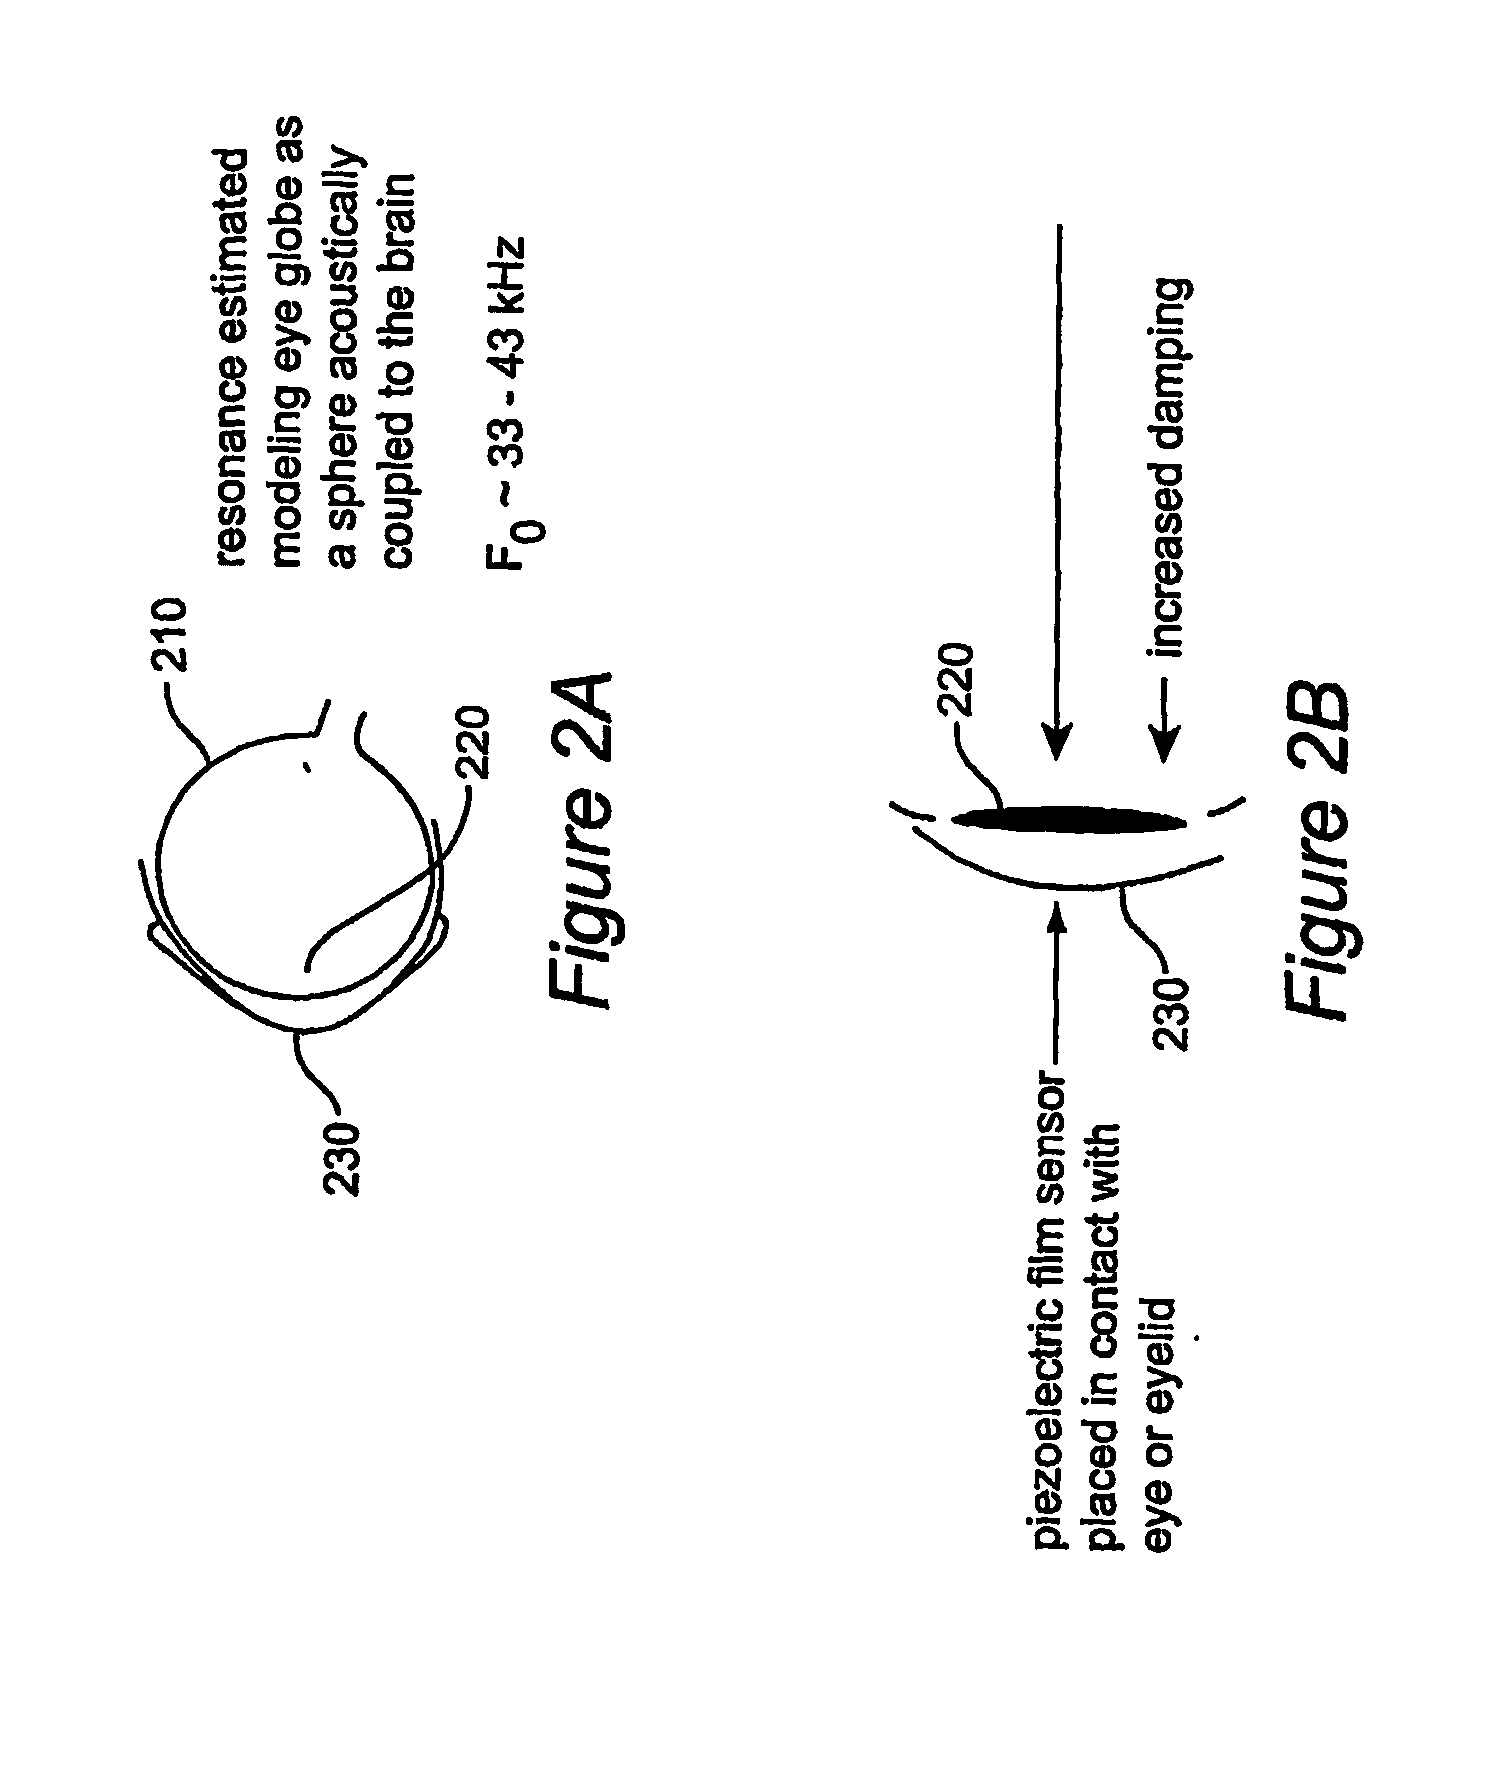 Method and apparatus for monitoring intra ocular and intra cranial pressure